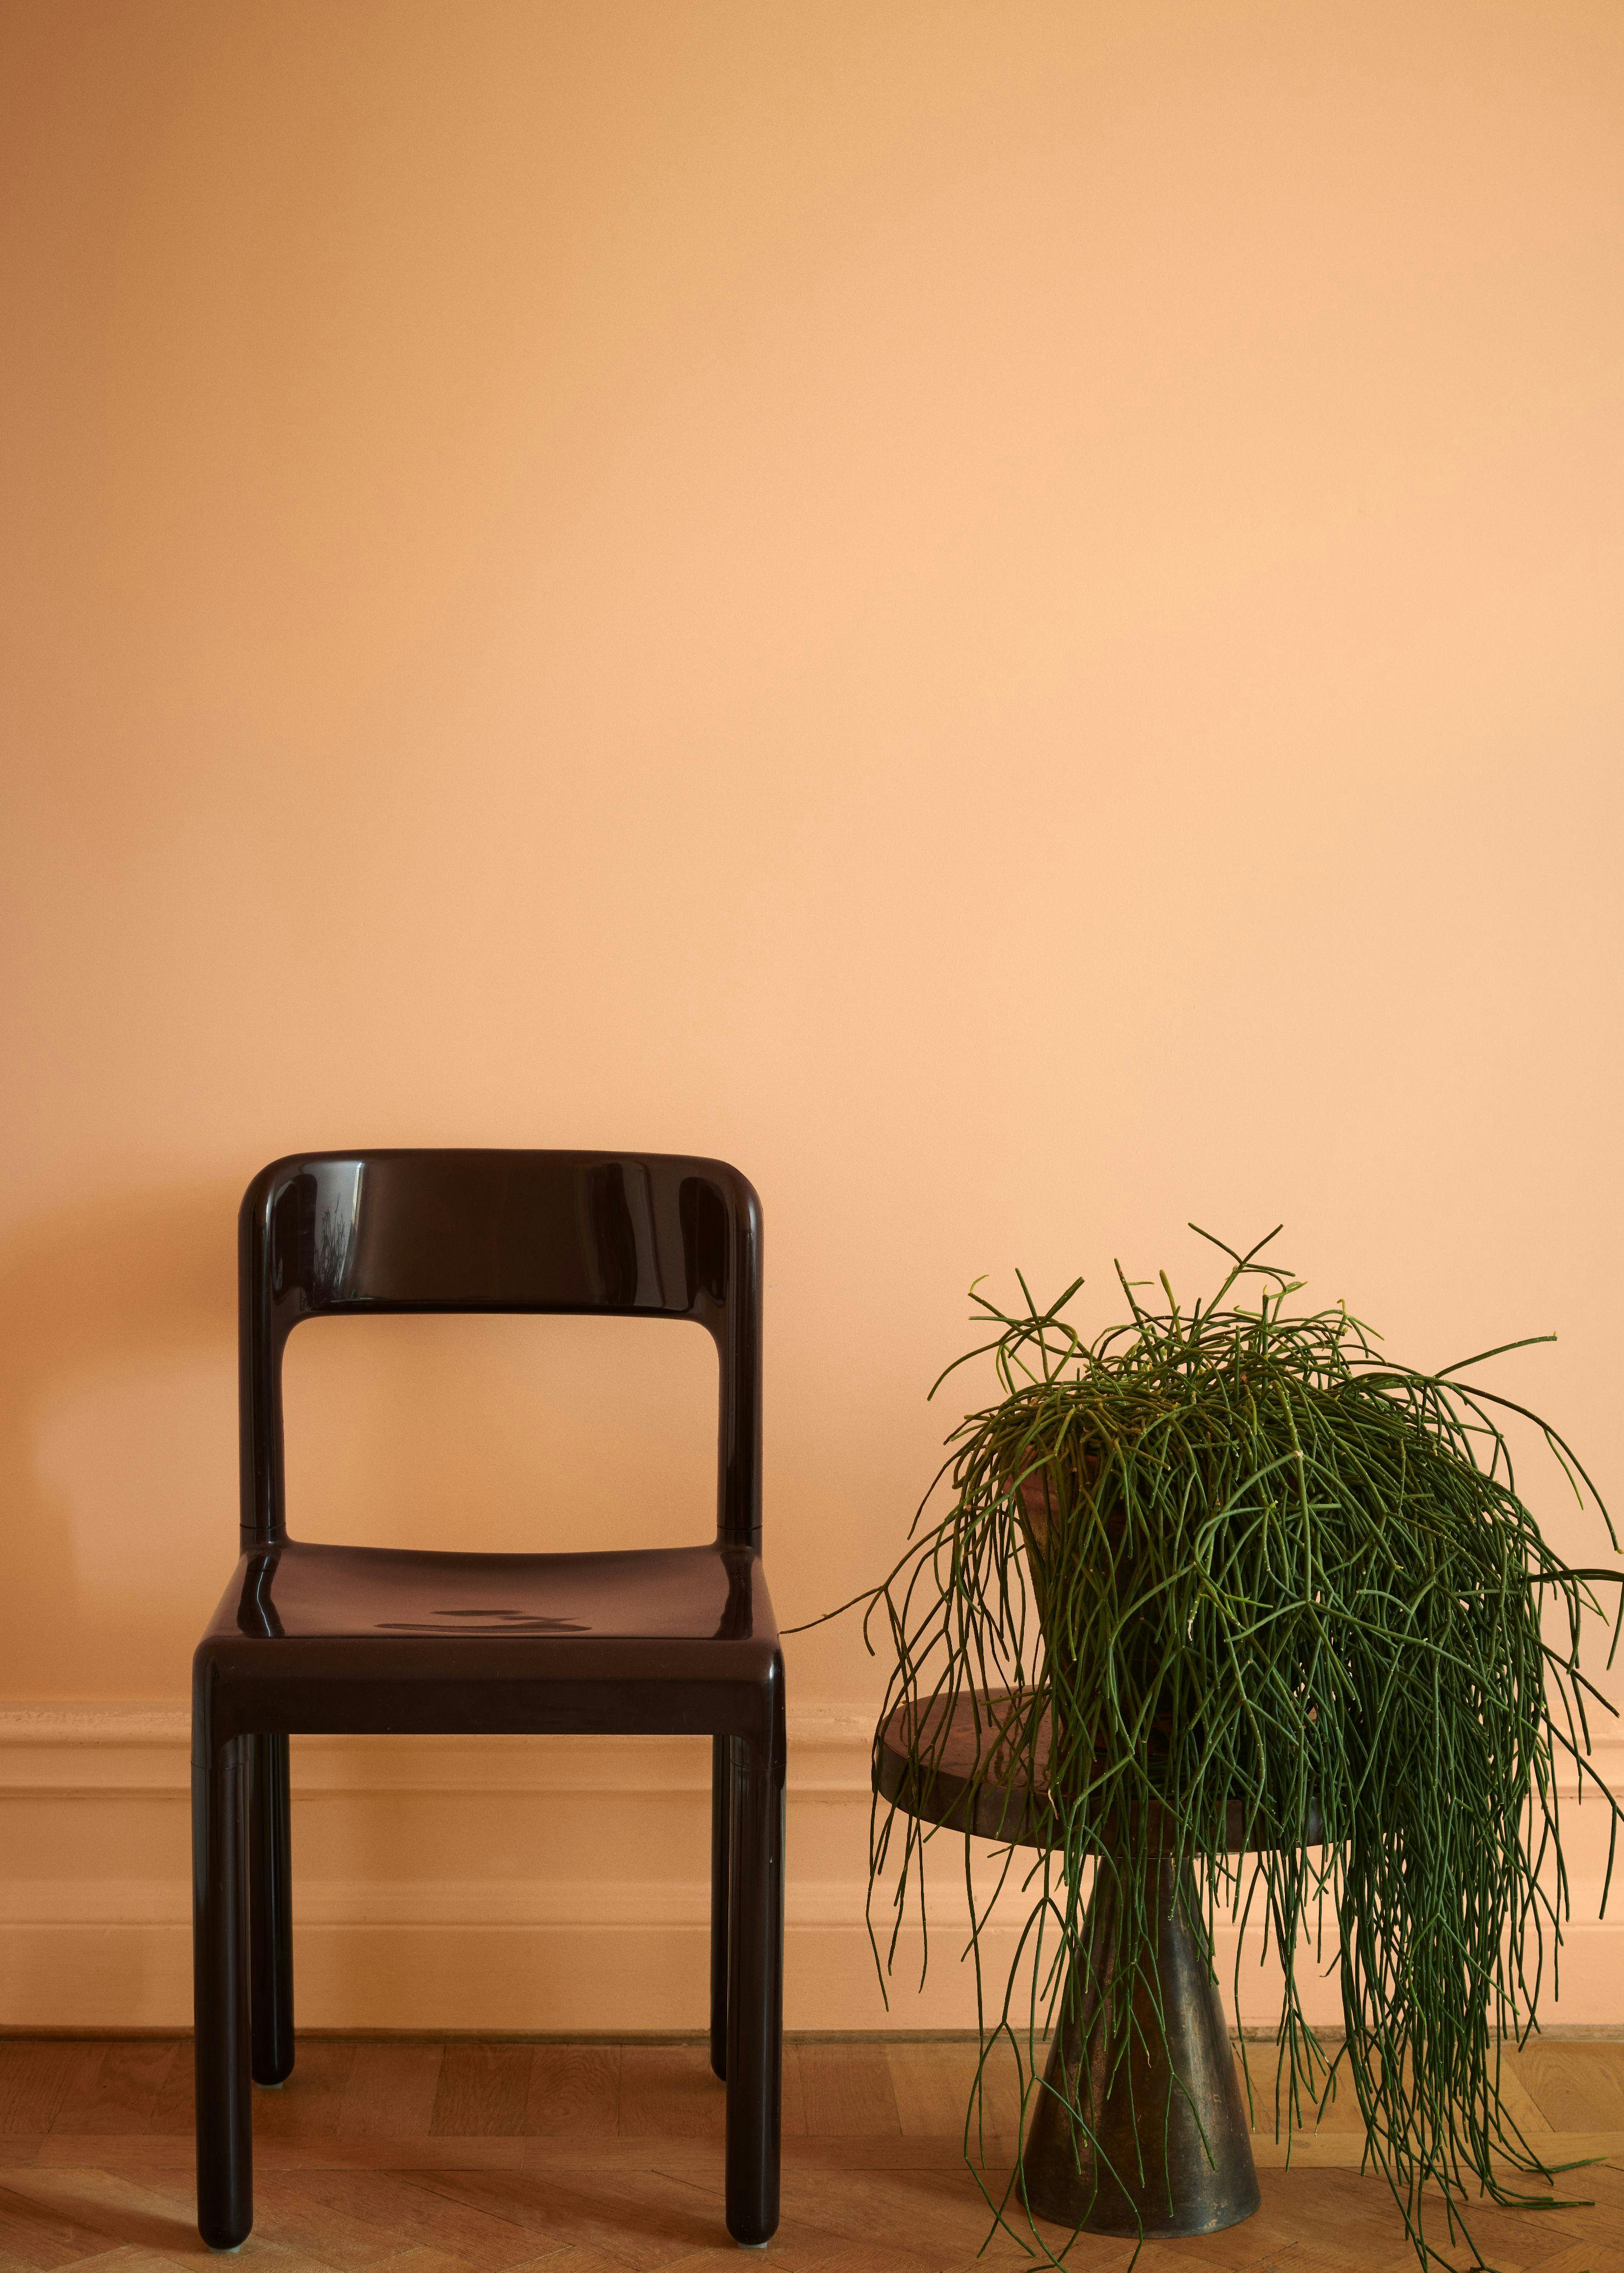 chair and plant in front of peach wall